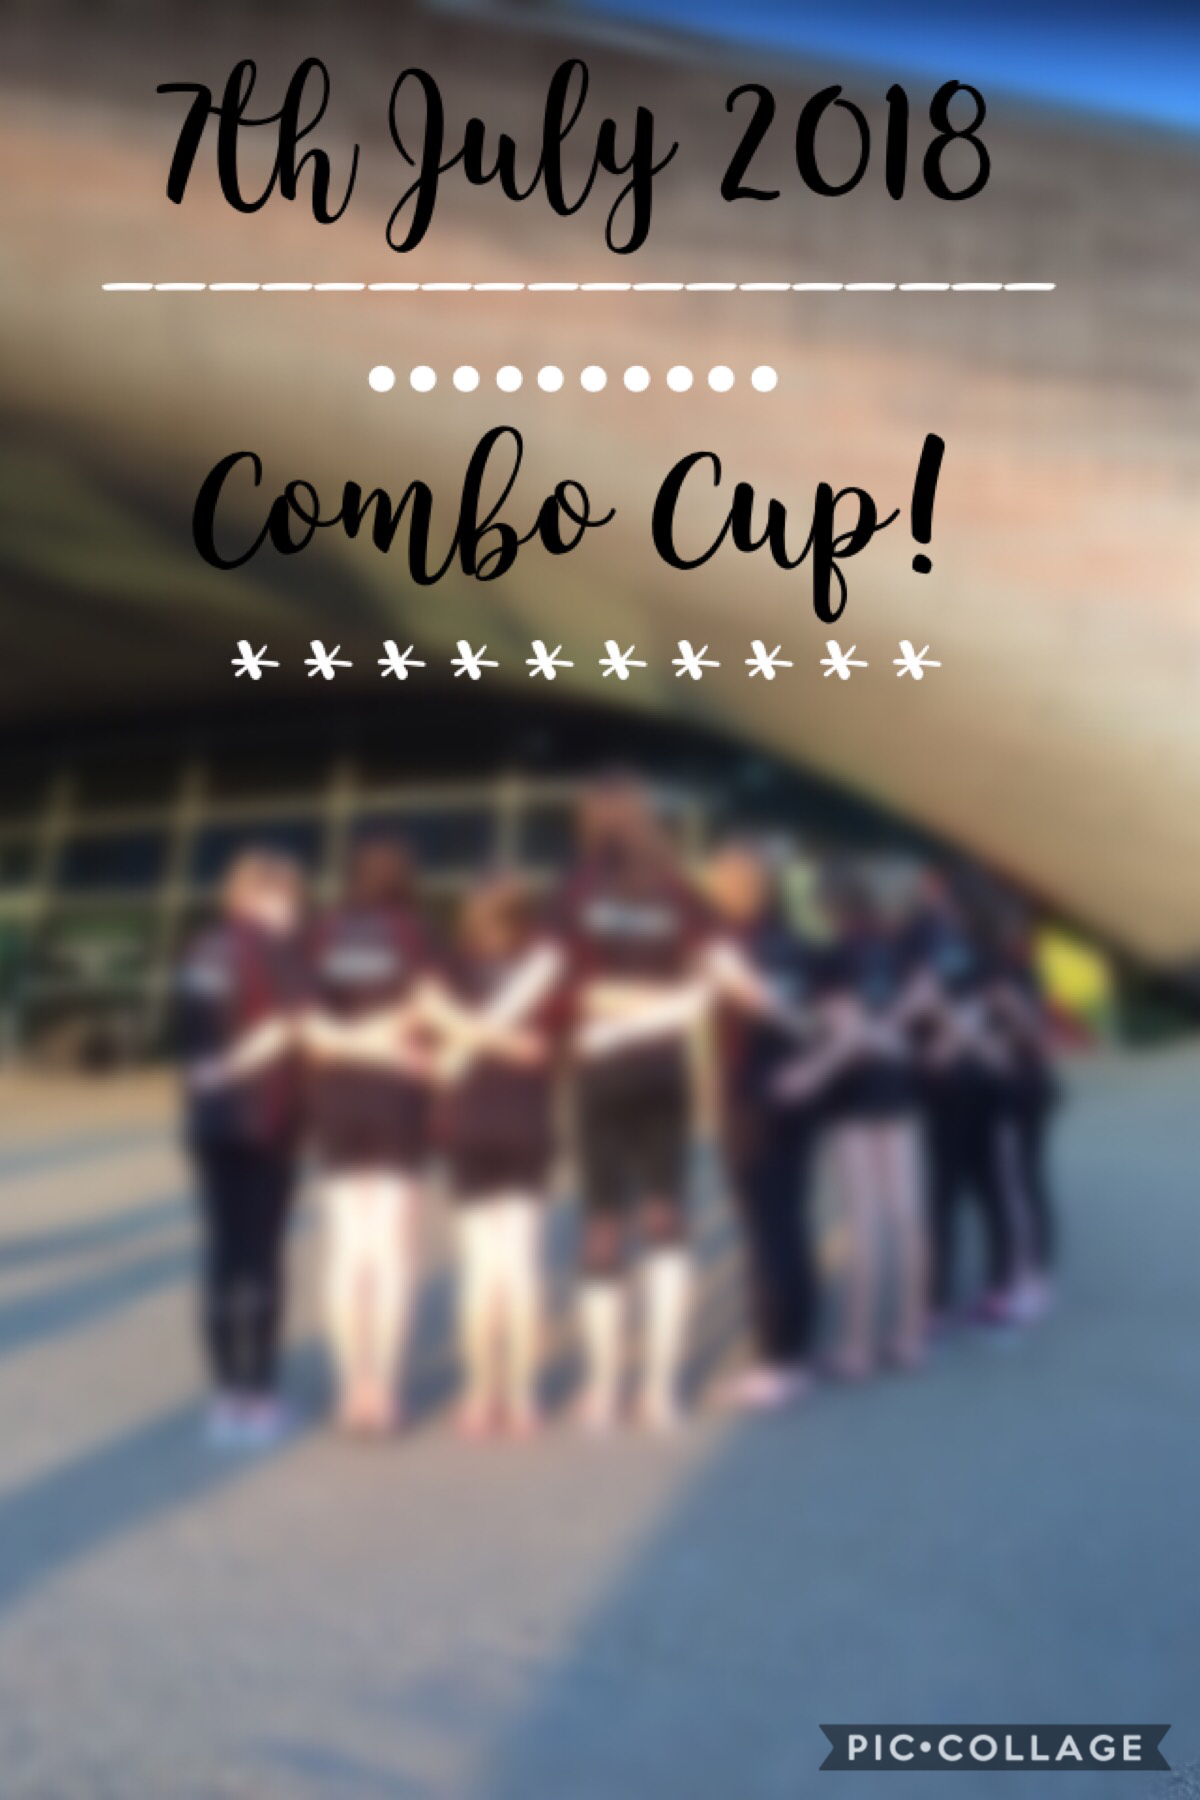 CHECK REMIXES FOR BLOG AND PICS!
So the Combo Cup is the nationals for synchronised swimmers of my recreational category! 
Comment 🚀 for spam! 
💘💘💘